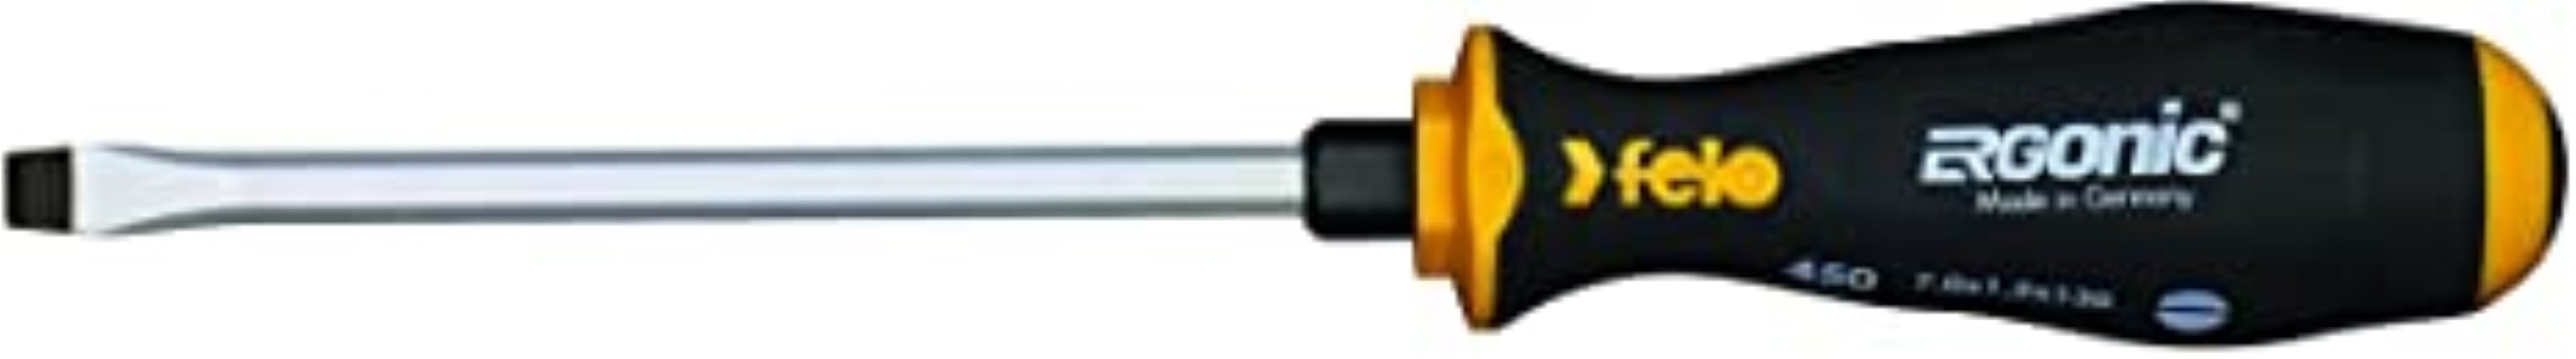 Felo 0715764525 Ergonic 23/64 in. x 6 in. Slotted Screwdriver with Hammer Cap